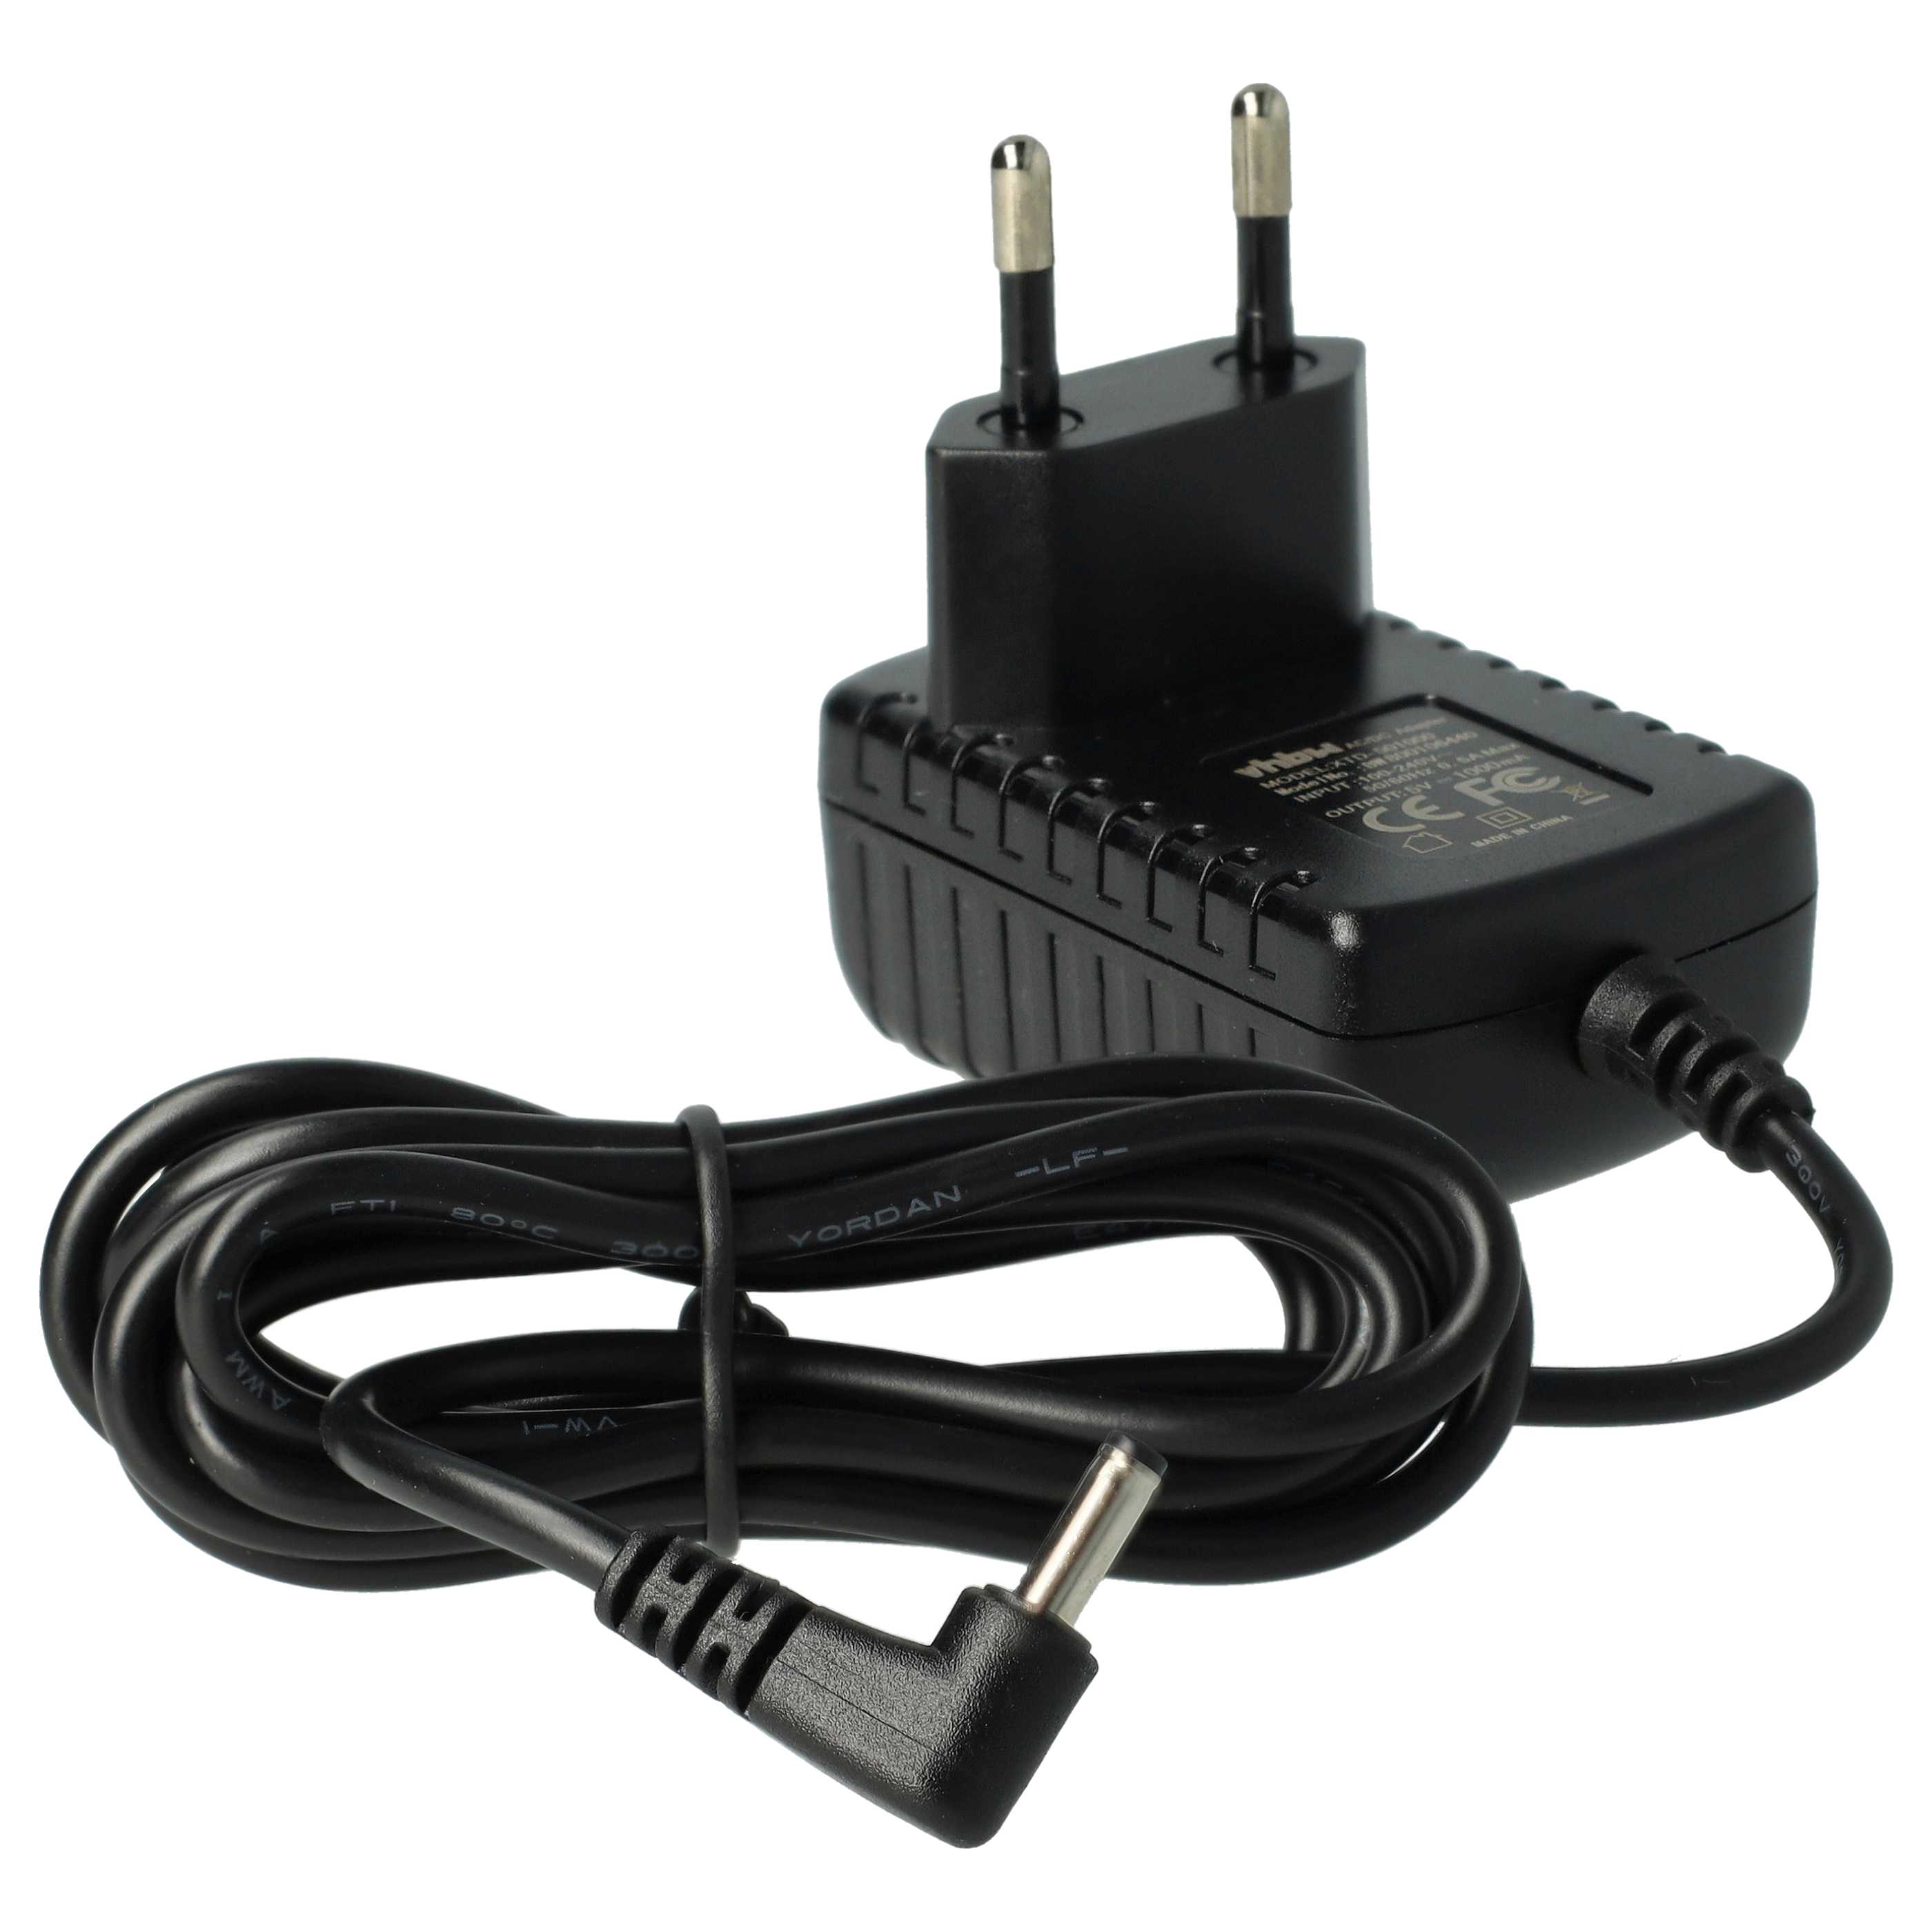 Mains Power Adapter suitable for EXP2546 Philips CD Player etc. - DC 5 V / 1 A